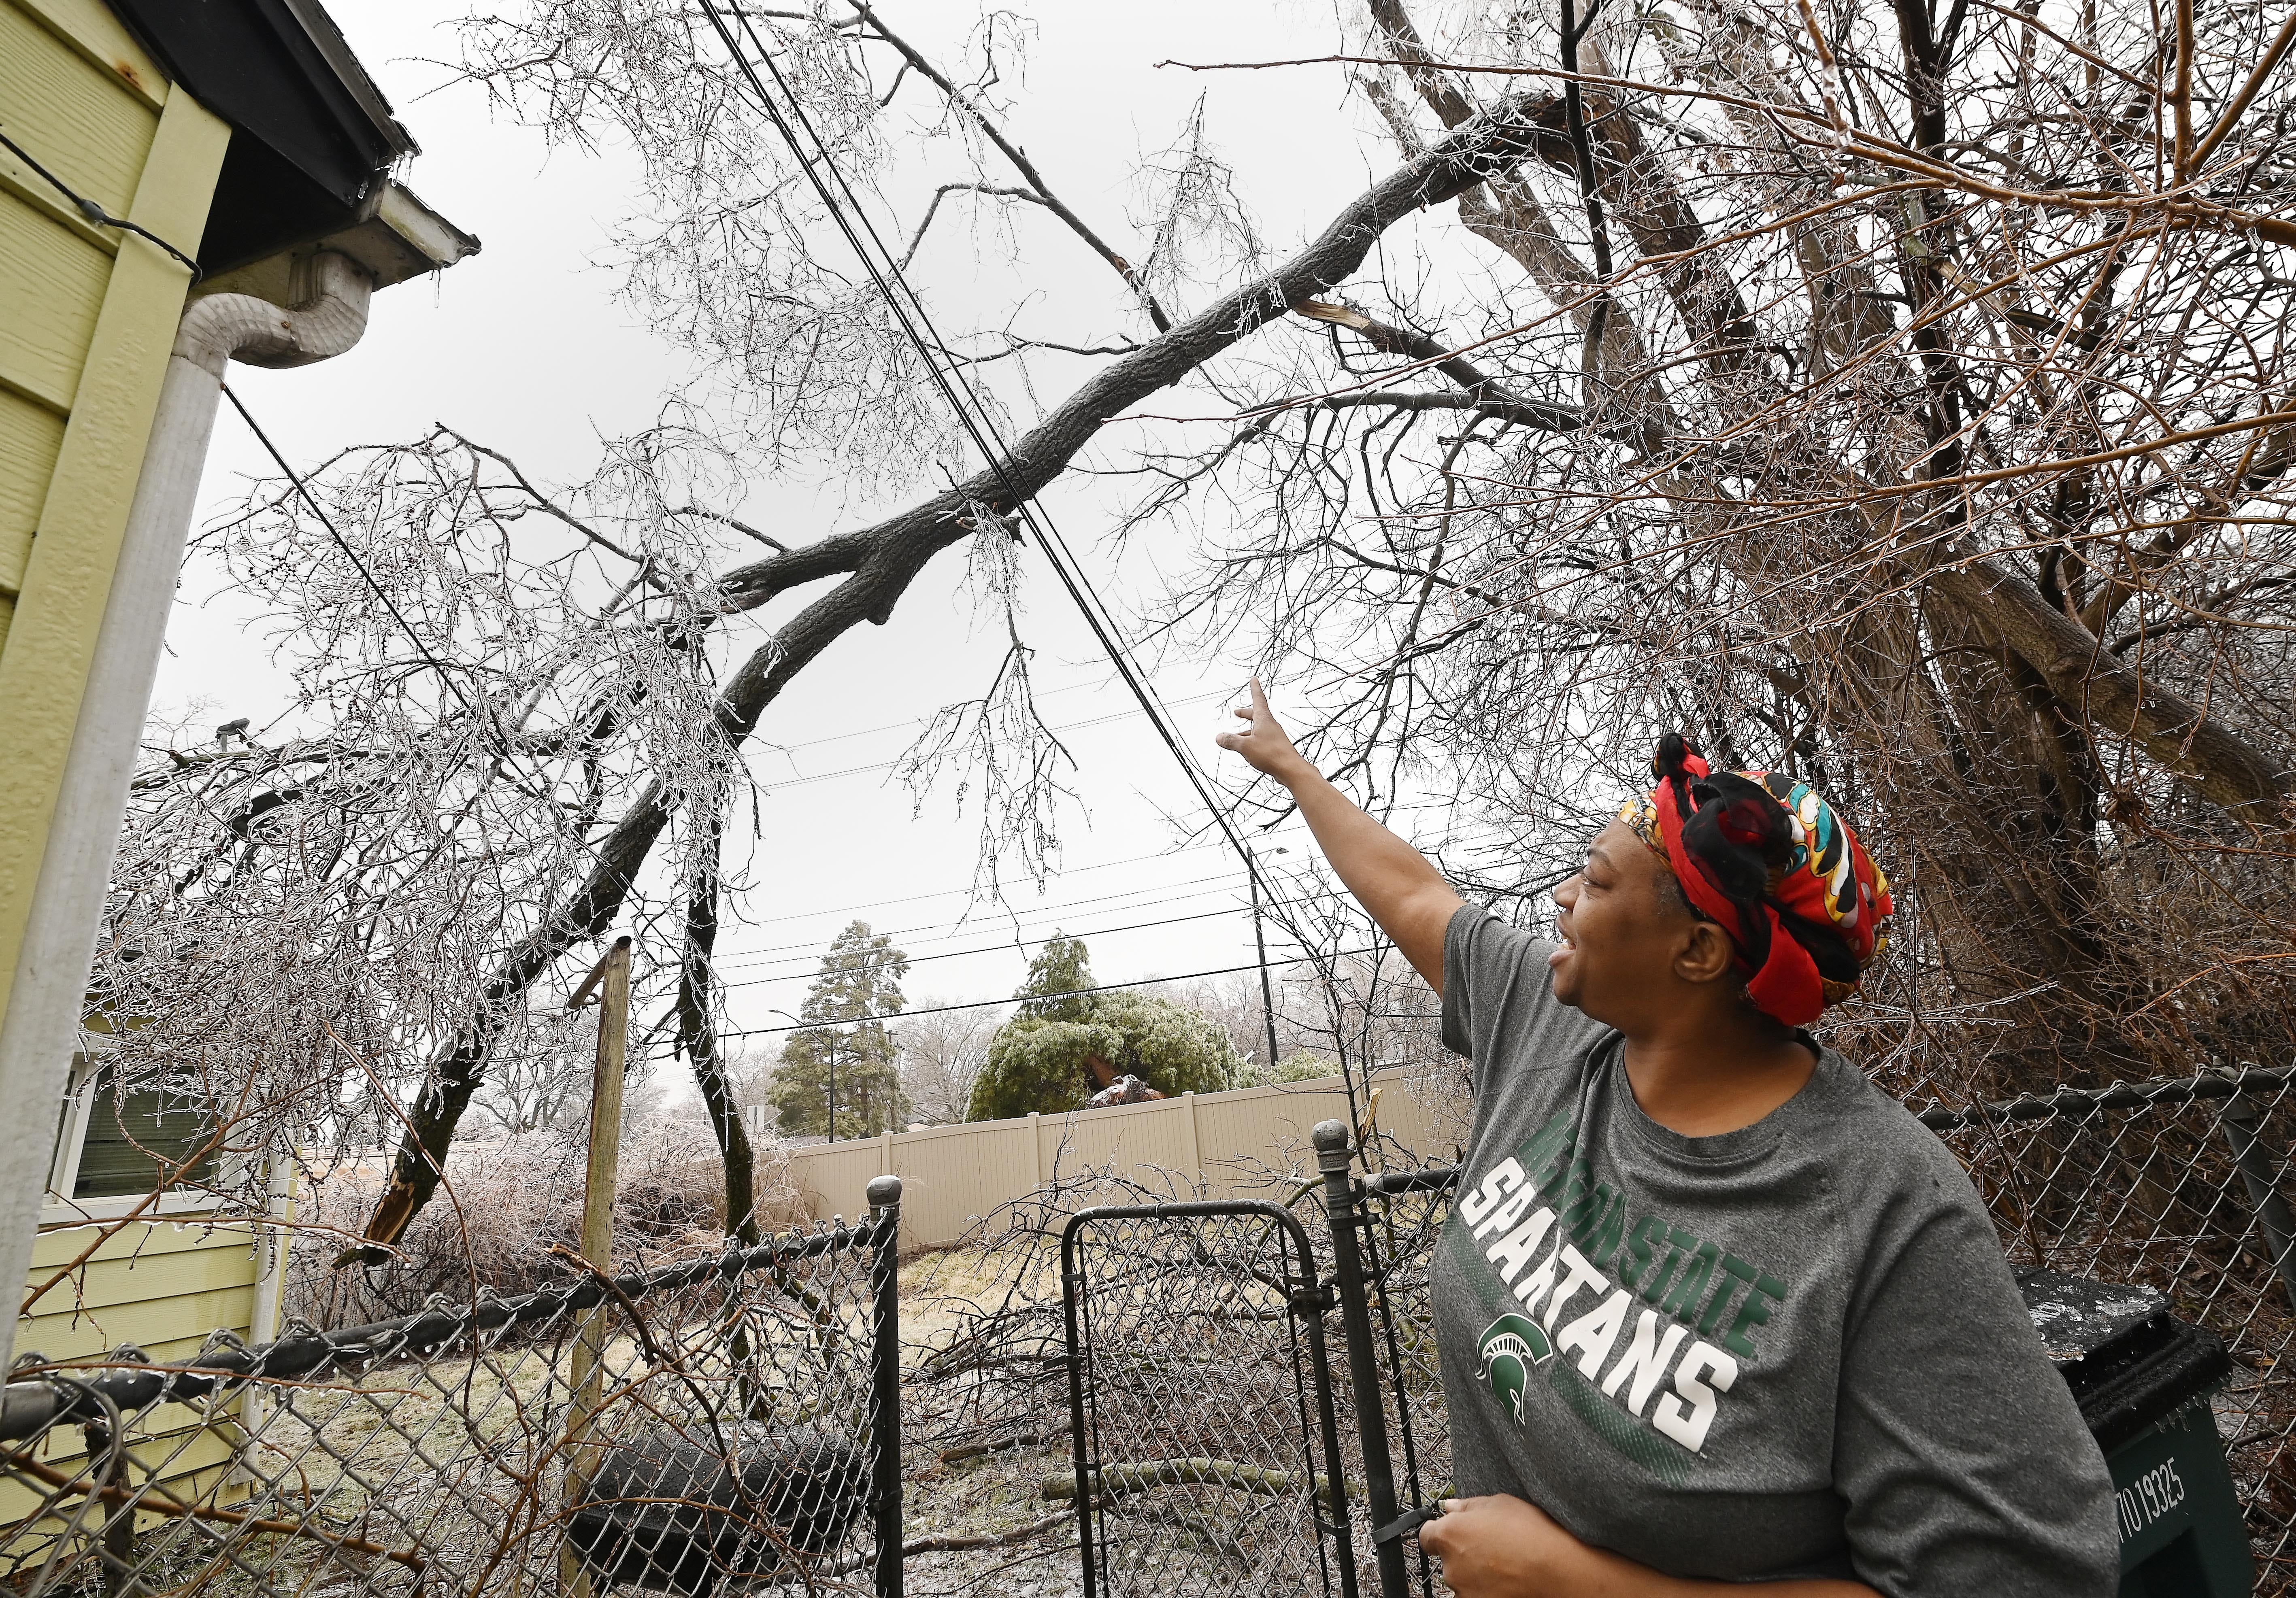 Jenett Johnson, 48, of Oak Park, shows a downed tree branch in her yard that damaged power lines from the ice storm Wednesday night.